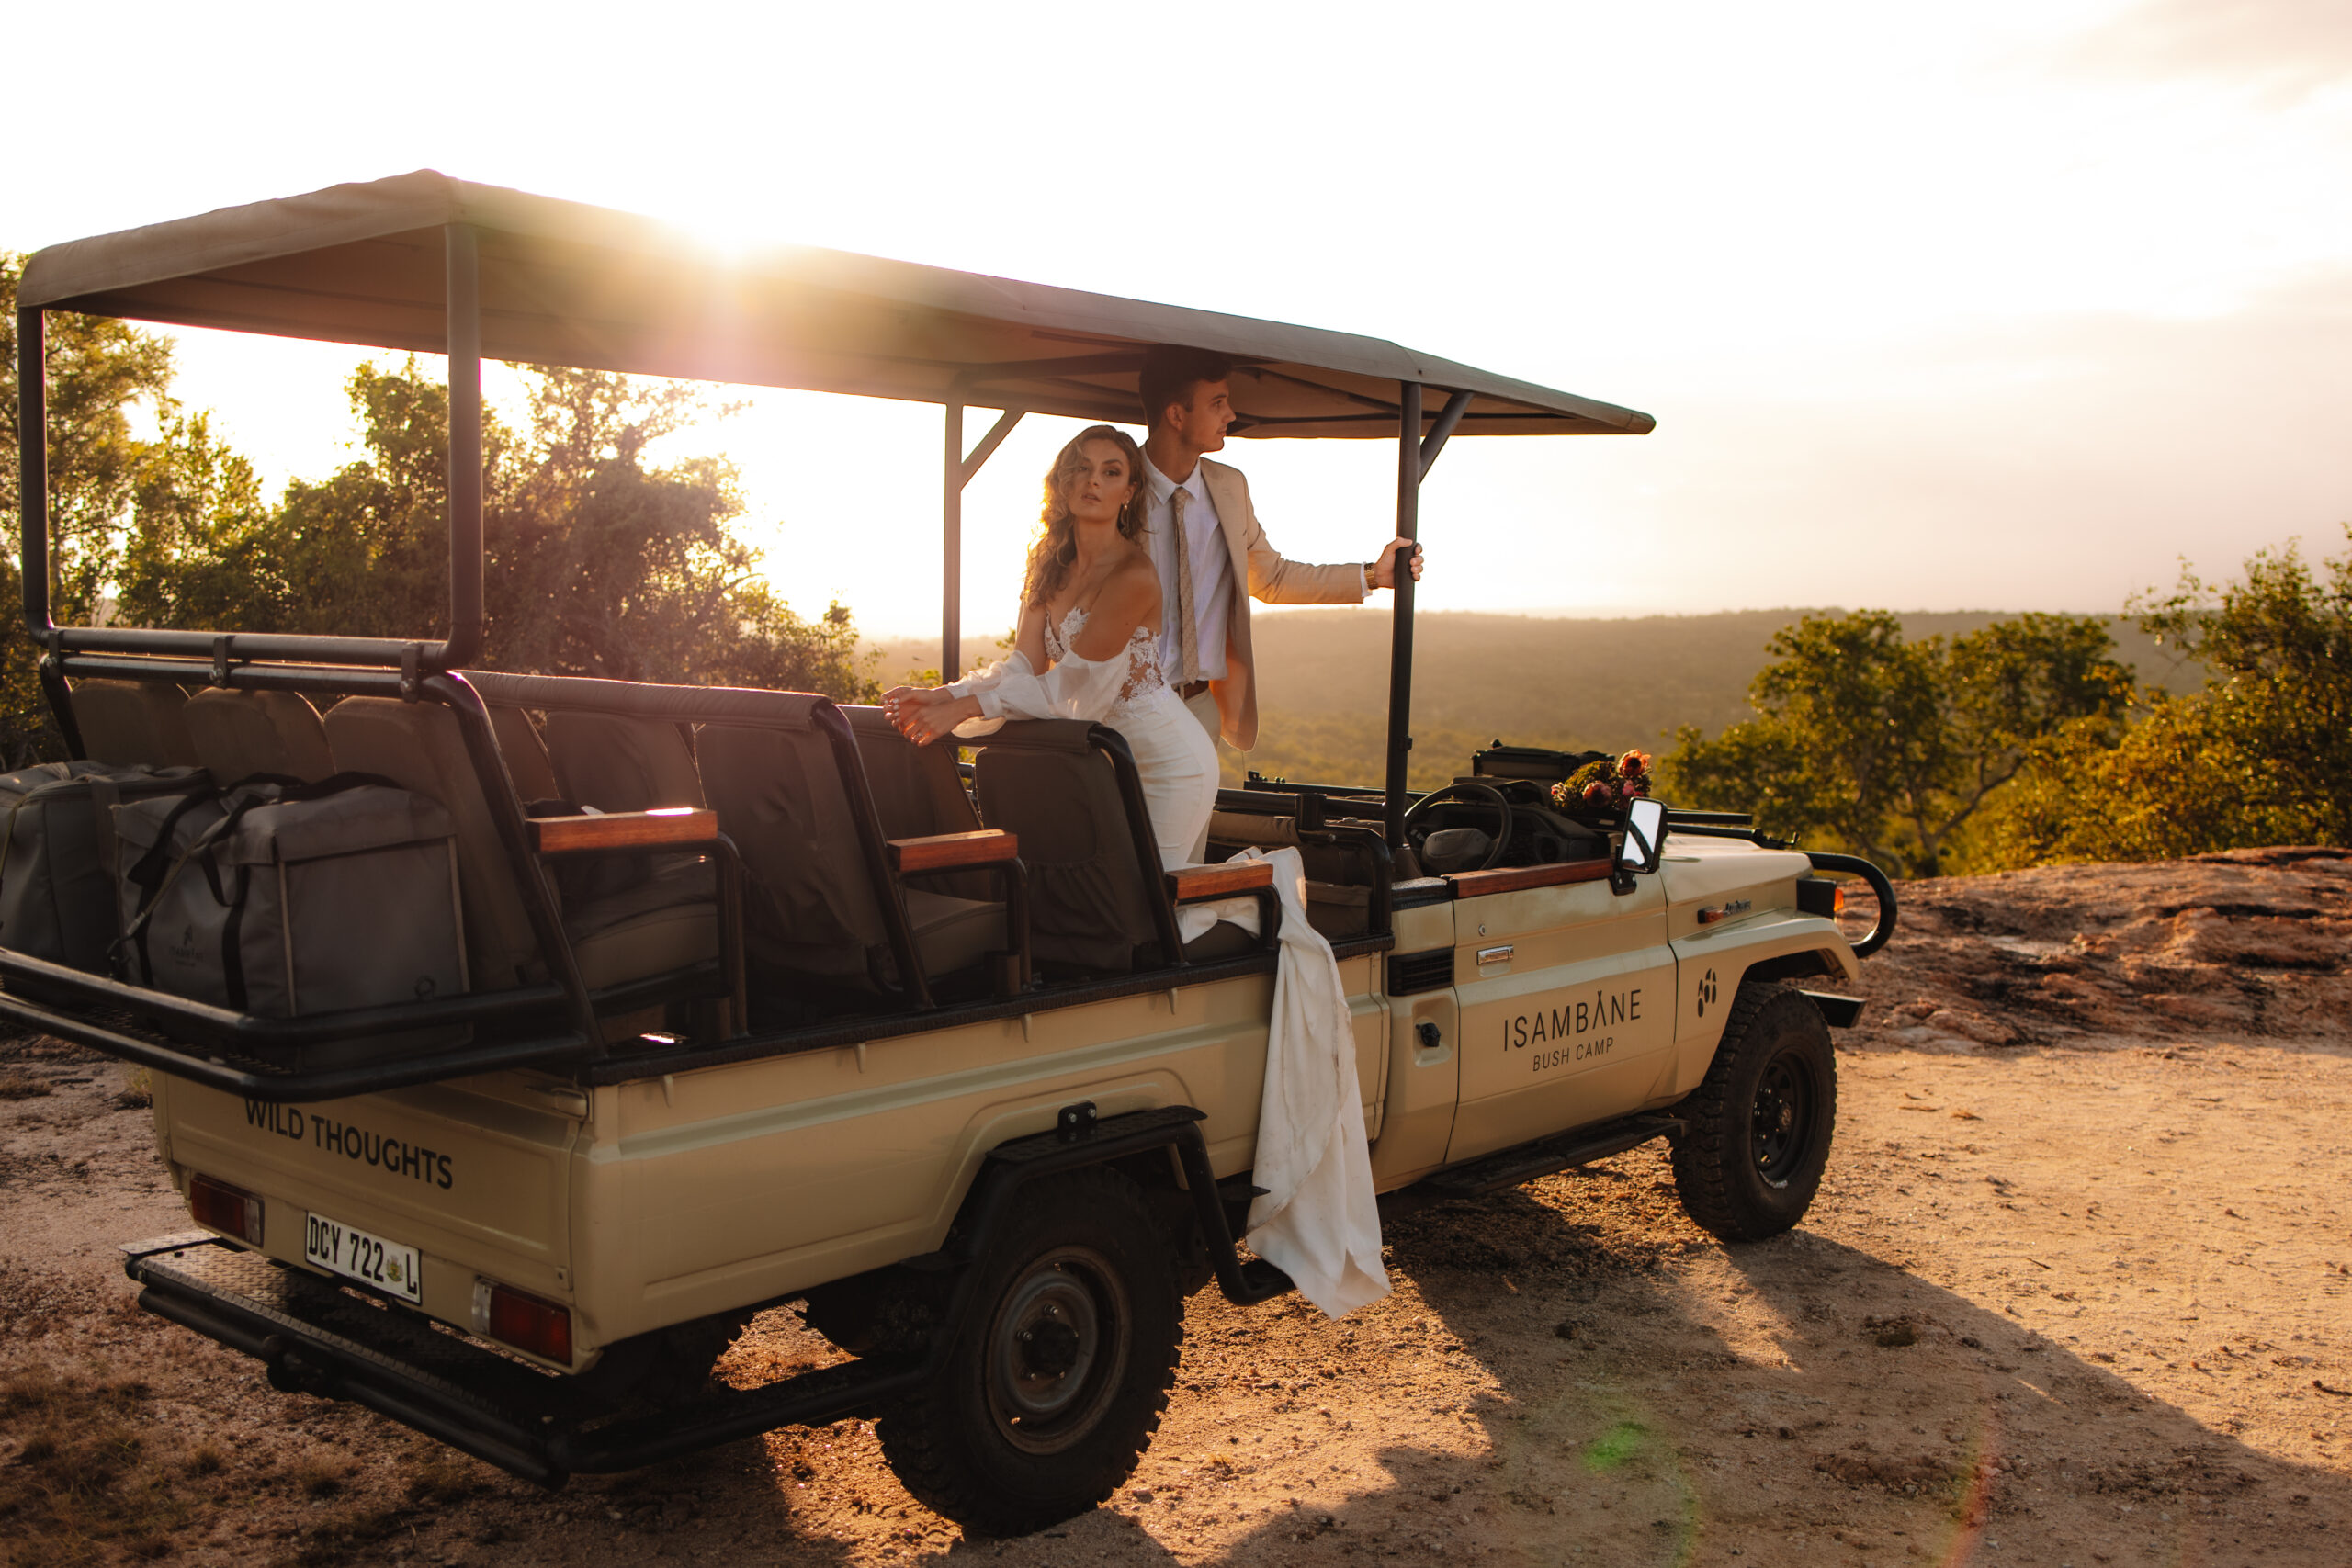 A couple dressed in wedding attire rides in an open-top safari vehicle at sunset, parked on a dirt path overlooking a scenic landscape in South Africa